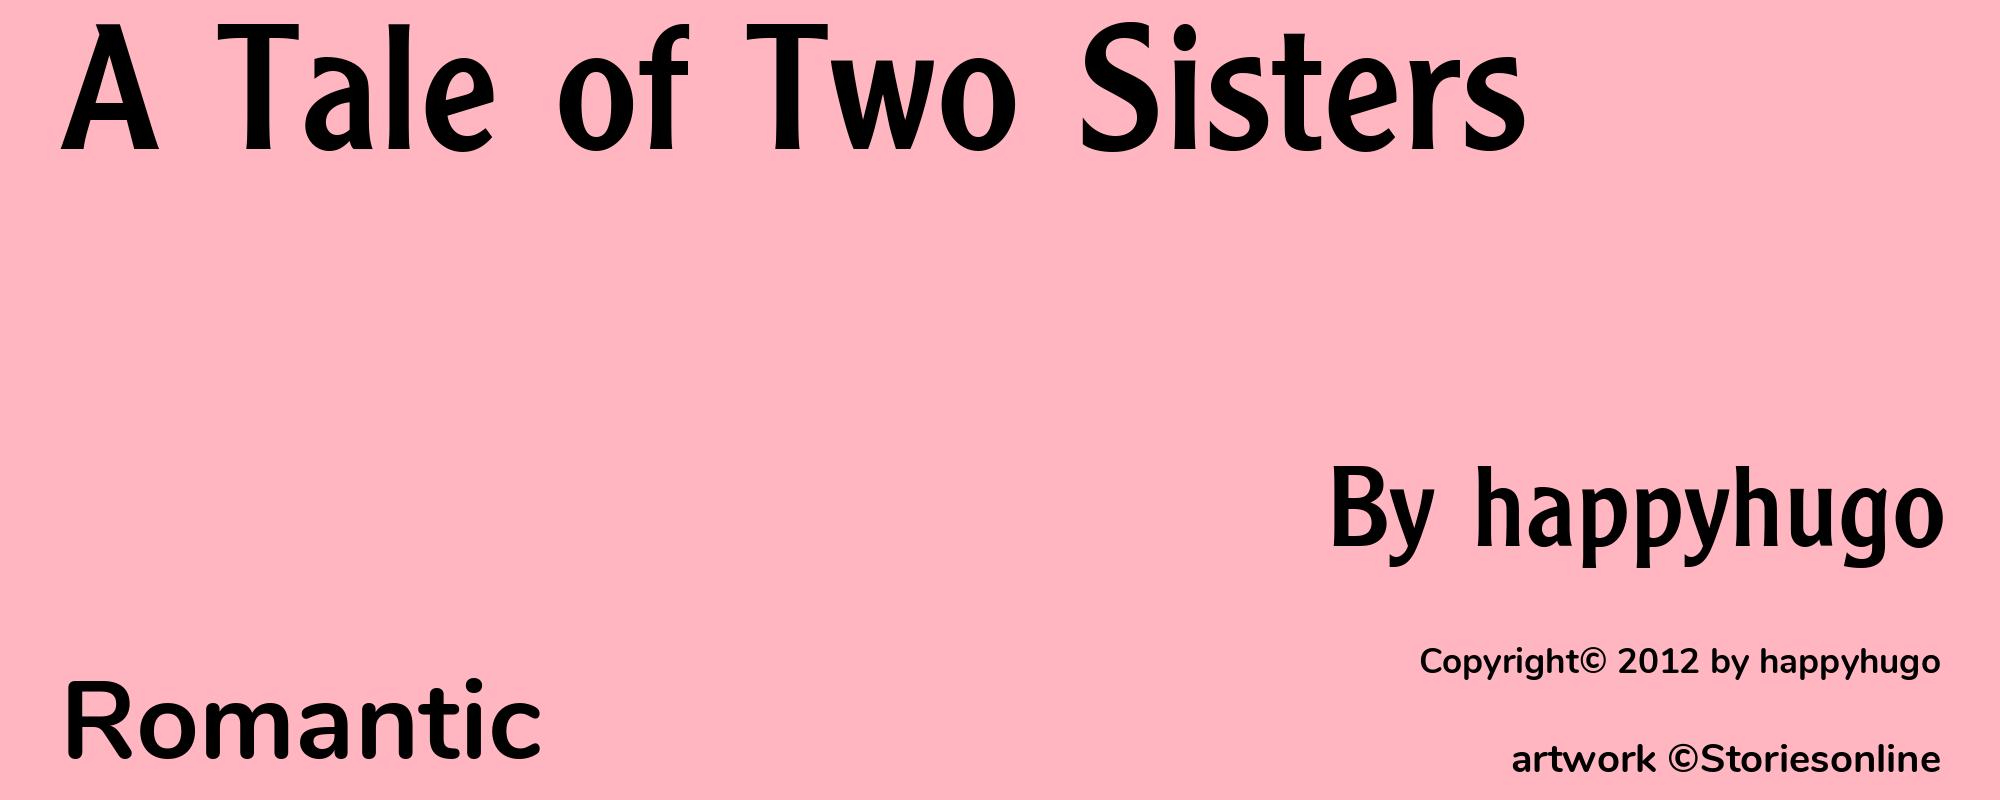 A Tale of Two Sisters - Cover